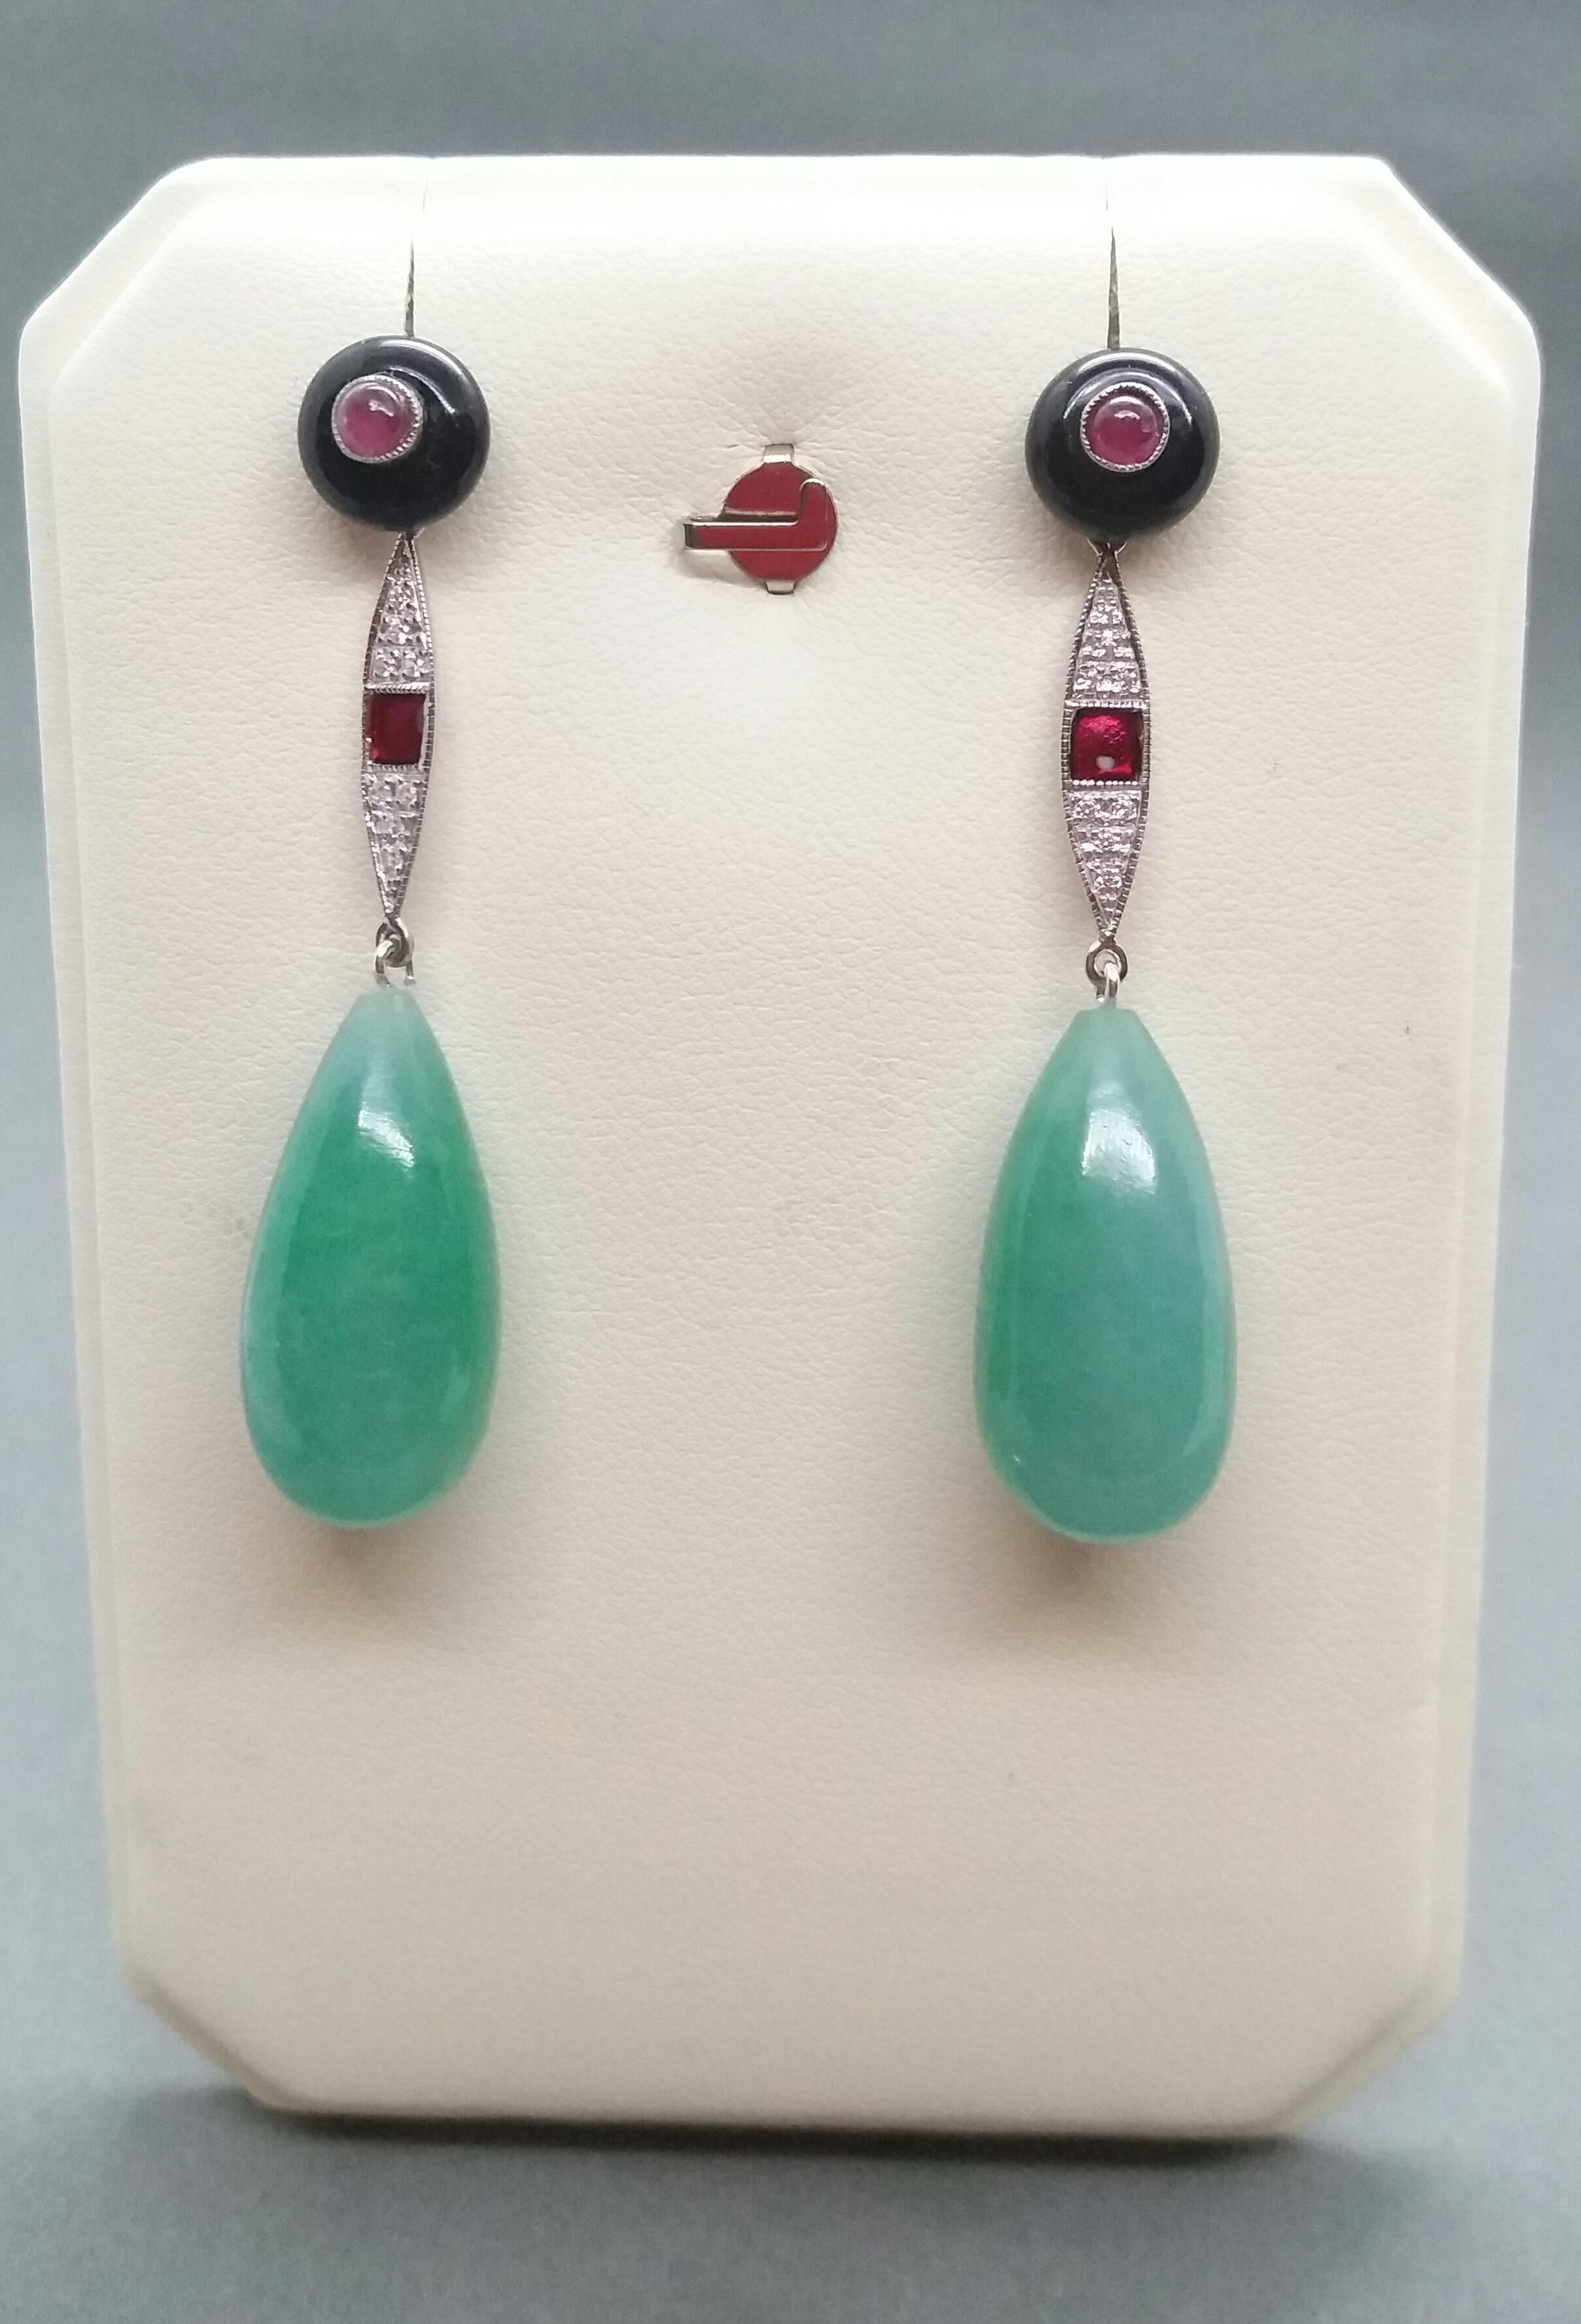 In these classic totally handmade Art Deco Style earrings we have 2 round black onix buttons with small round Rubies in the center,middle parts in white gold,16 small round full cut diamonds,red enamel,2 Burma Jade round drops size 23x 12 mm.

In